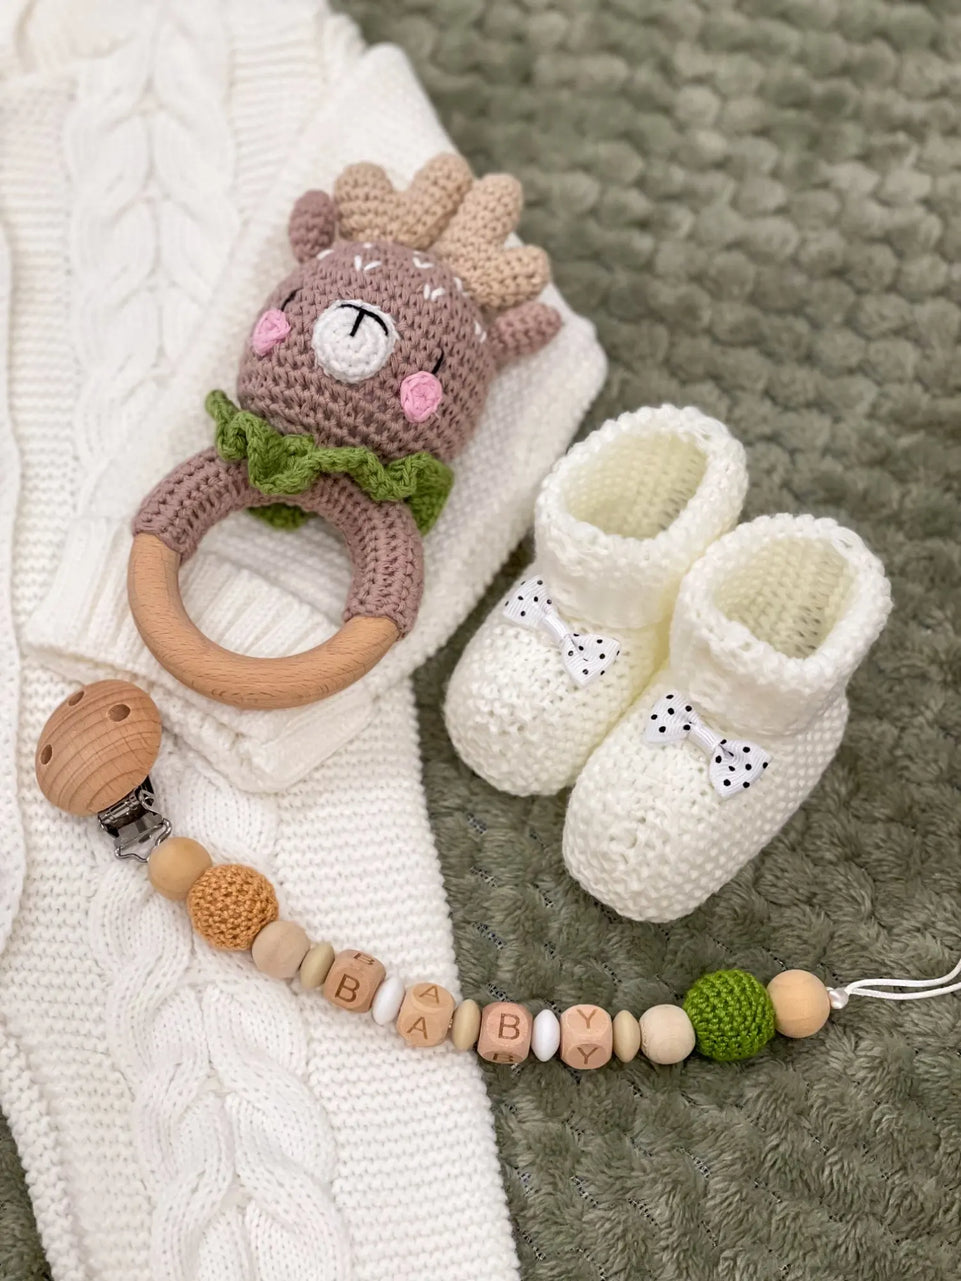 1PC Baby Ratter Toys Wooden Teether Crochet Animals BPA Free Rattle Toy Newborn Amigurumi Teether Baby Rattles Gifts For Newborn